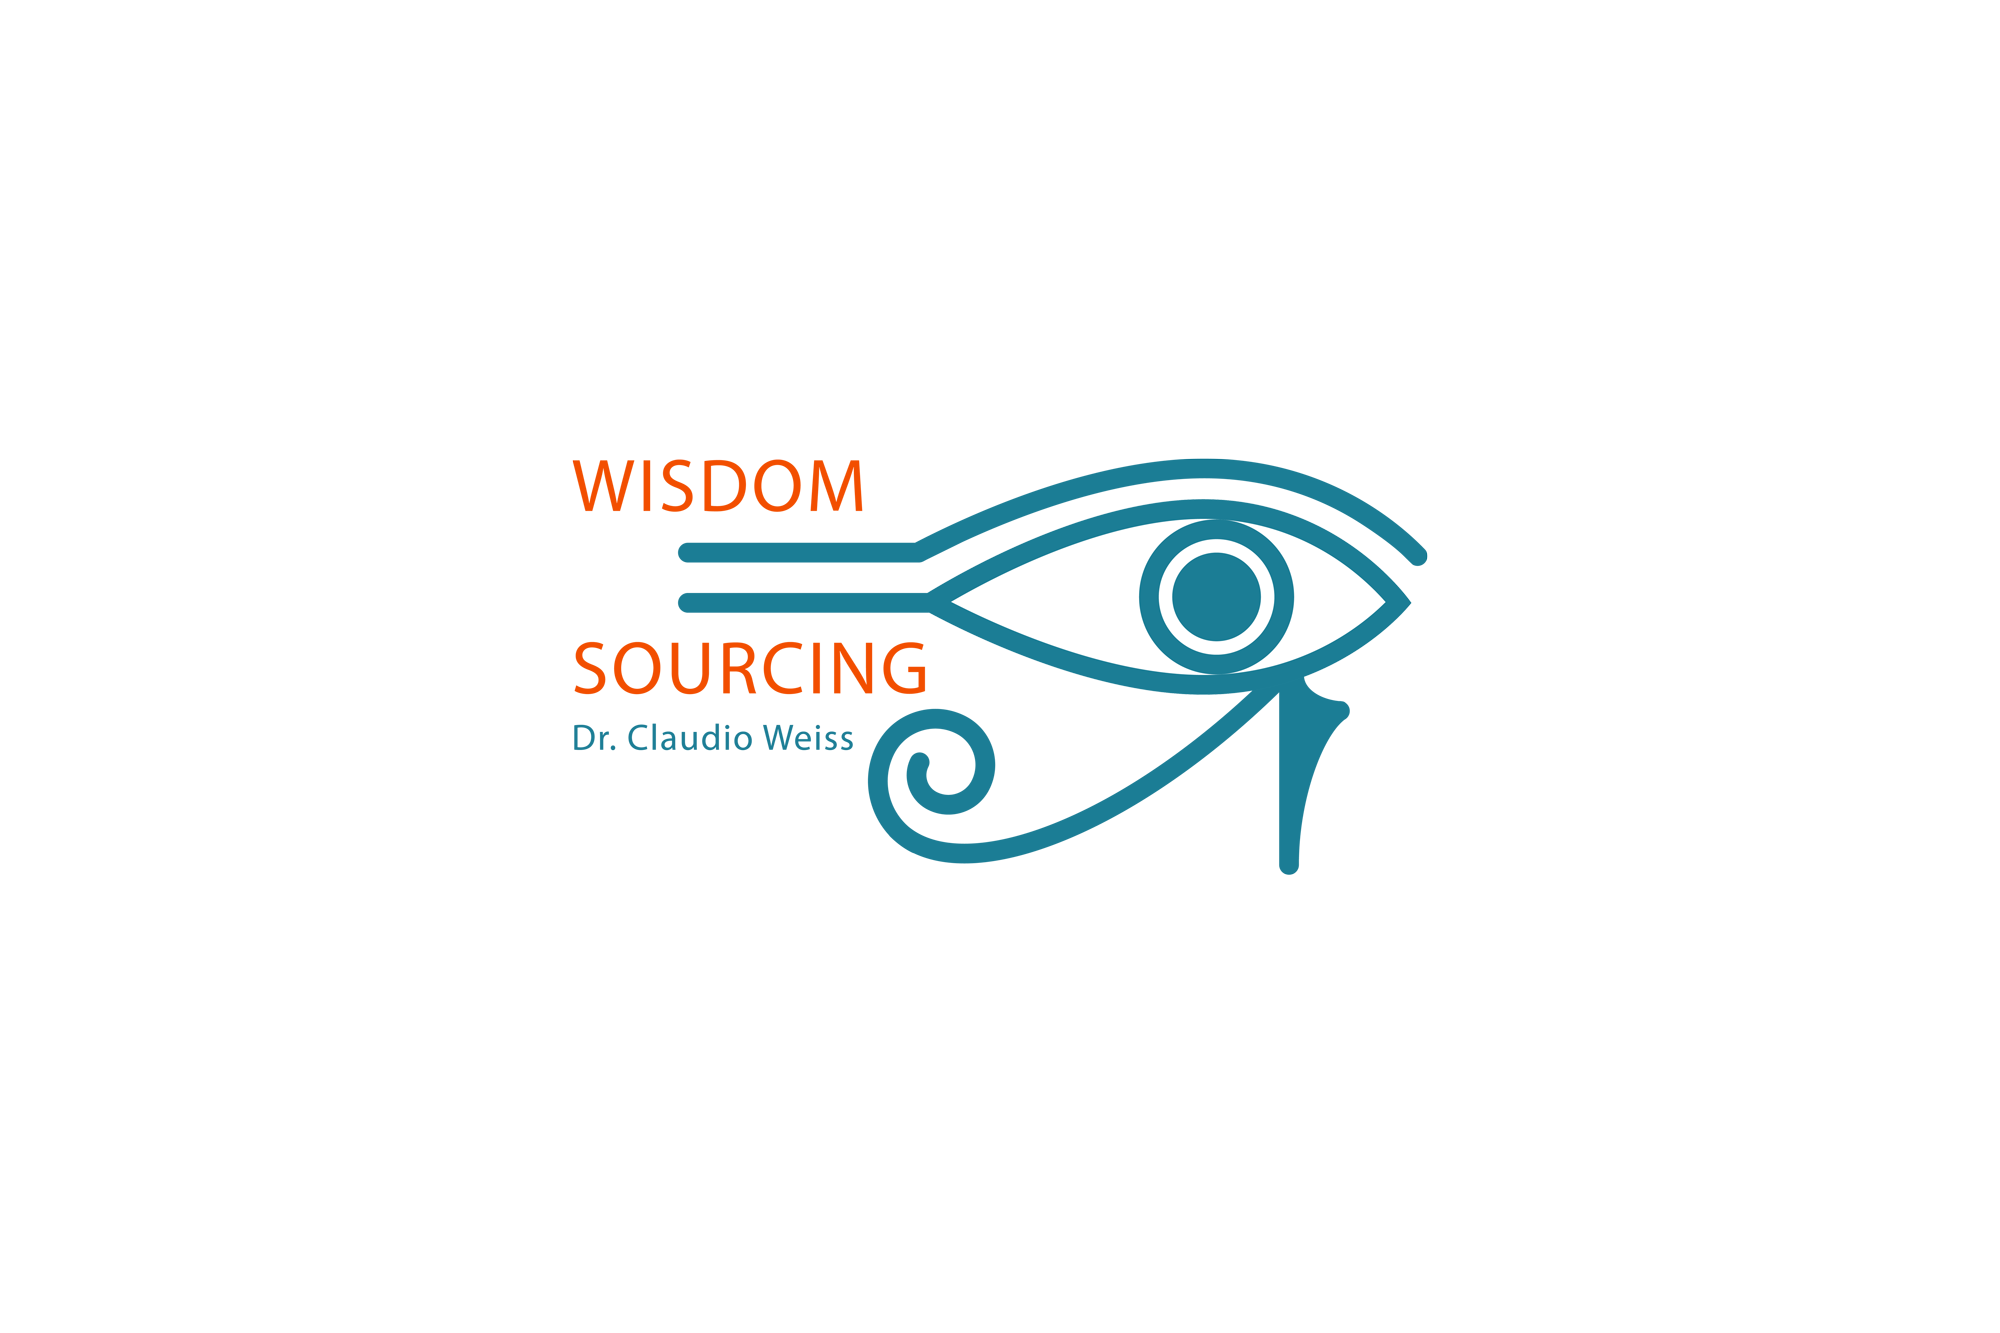 Wisdom Sourcing by Dr. Claudio Weiss